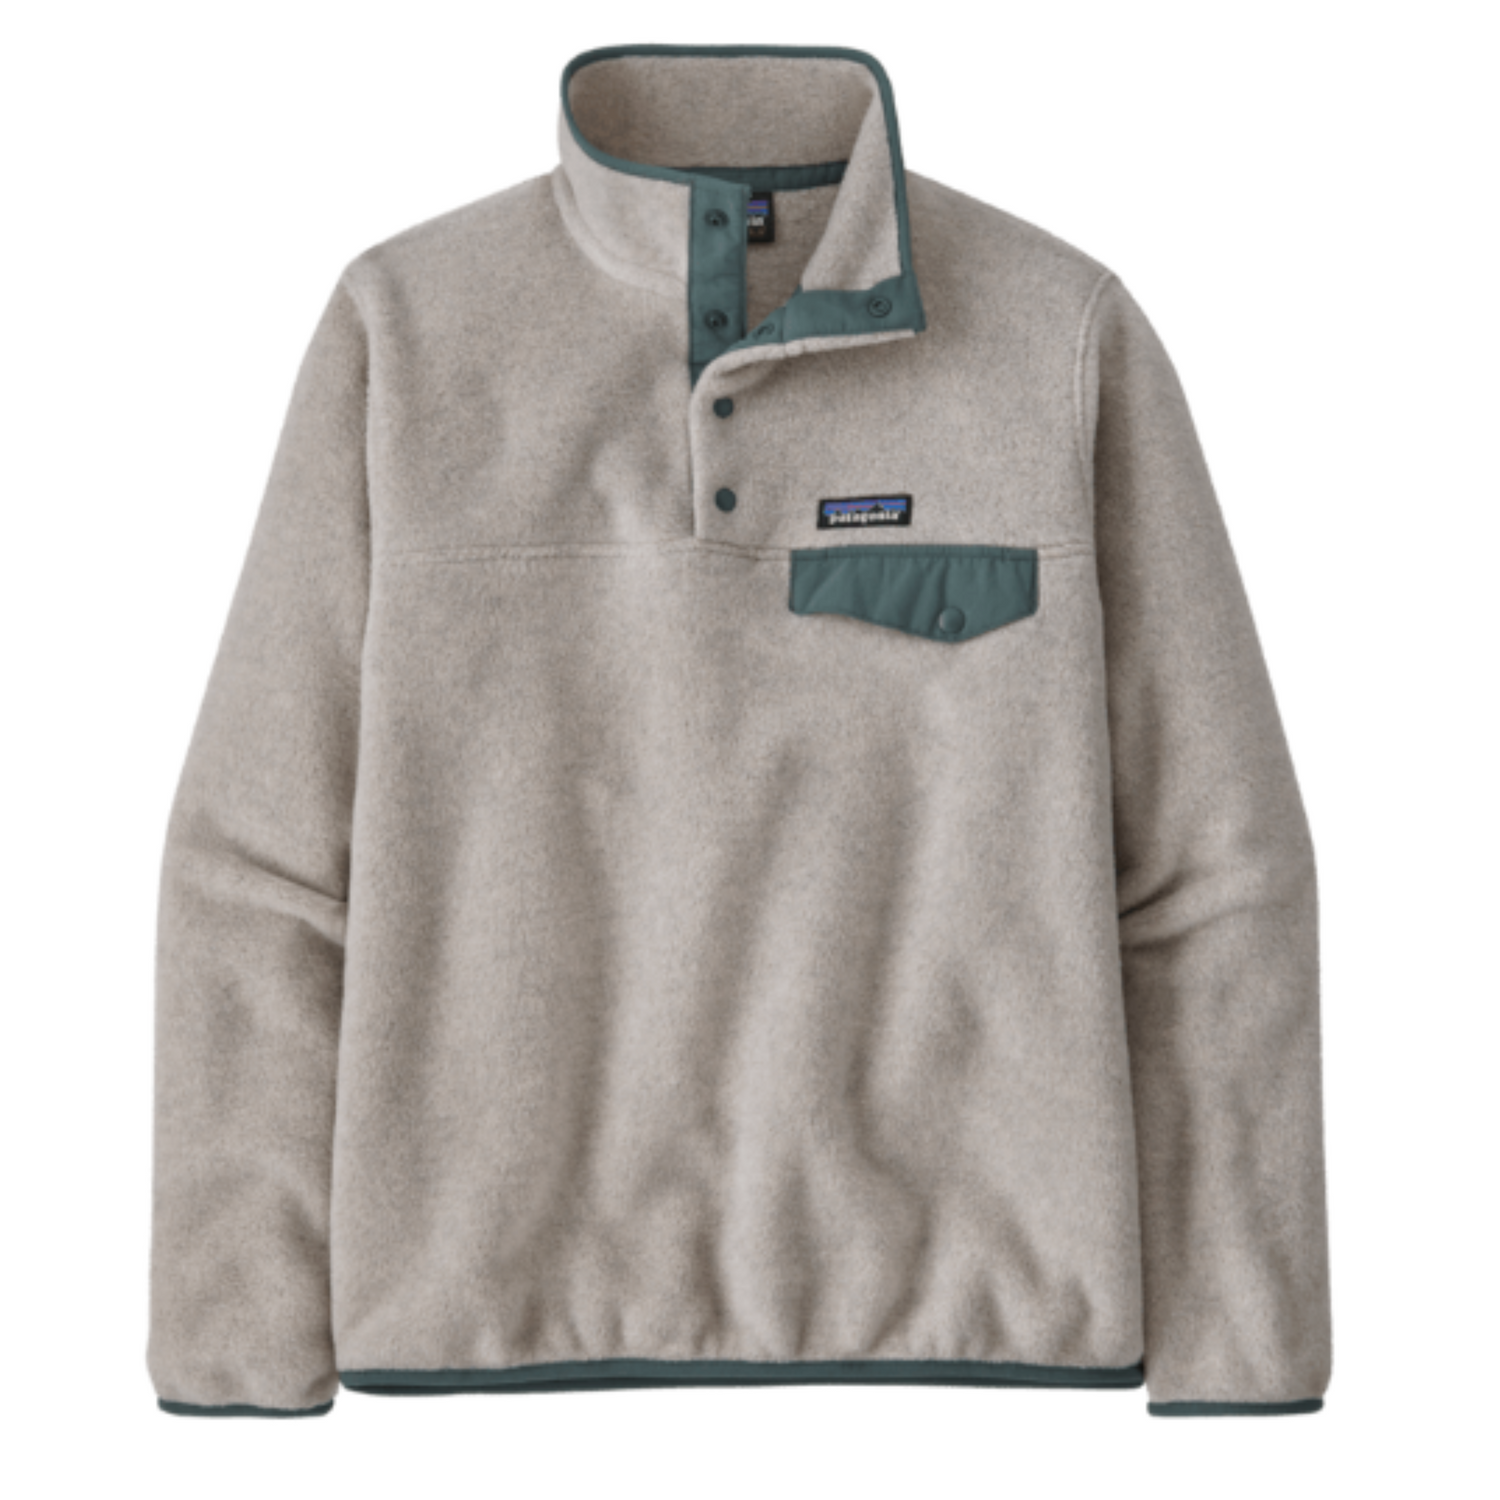 Patagonia Women's LW Synch Snap-T Pullover in oatmeal and green